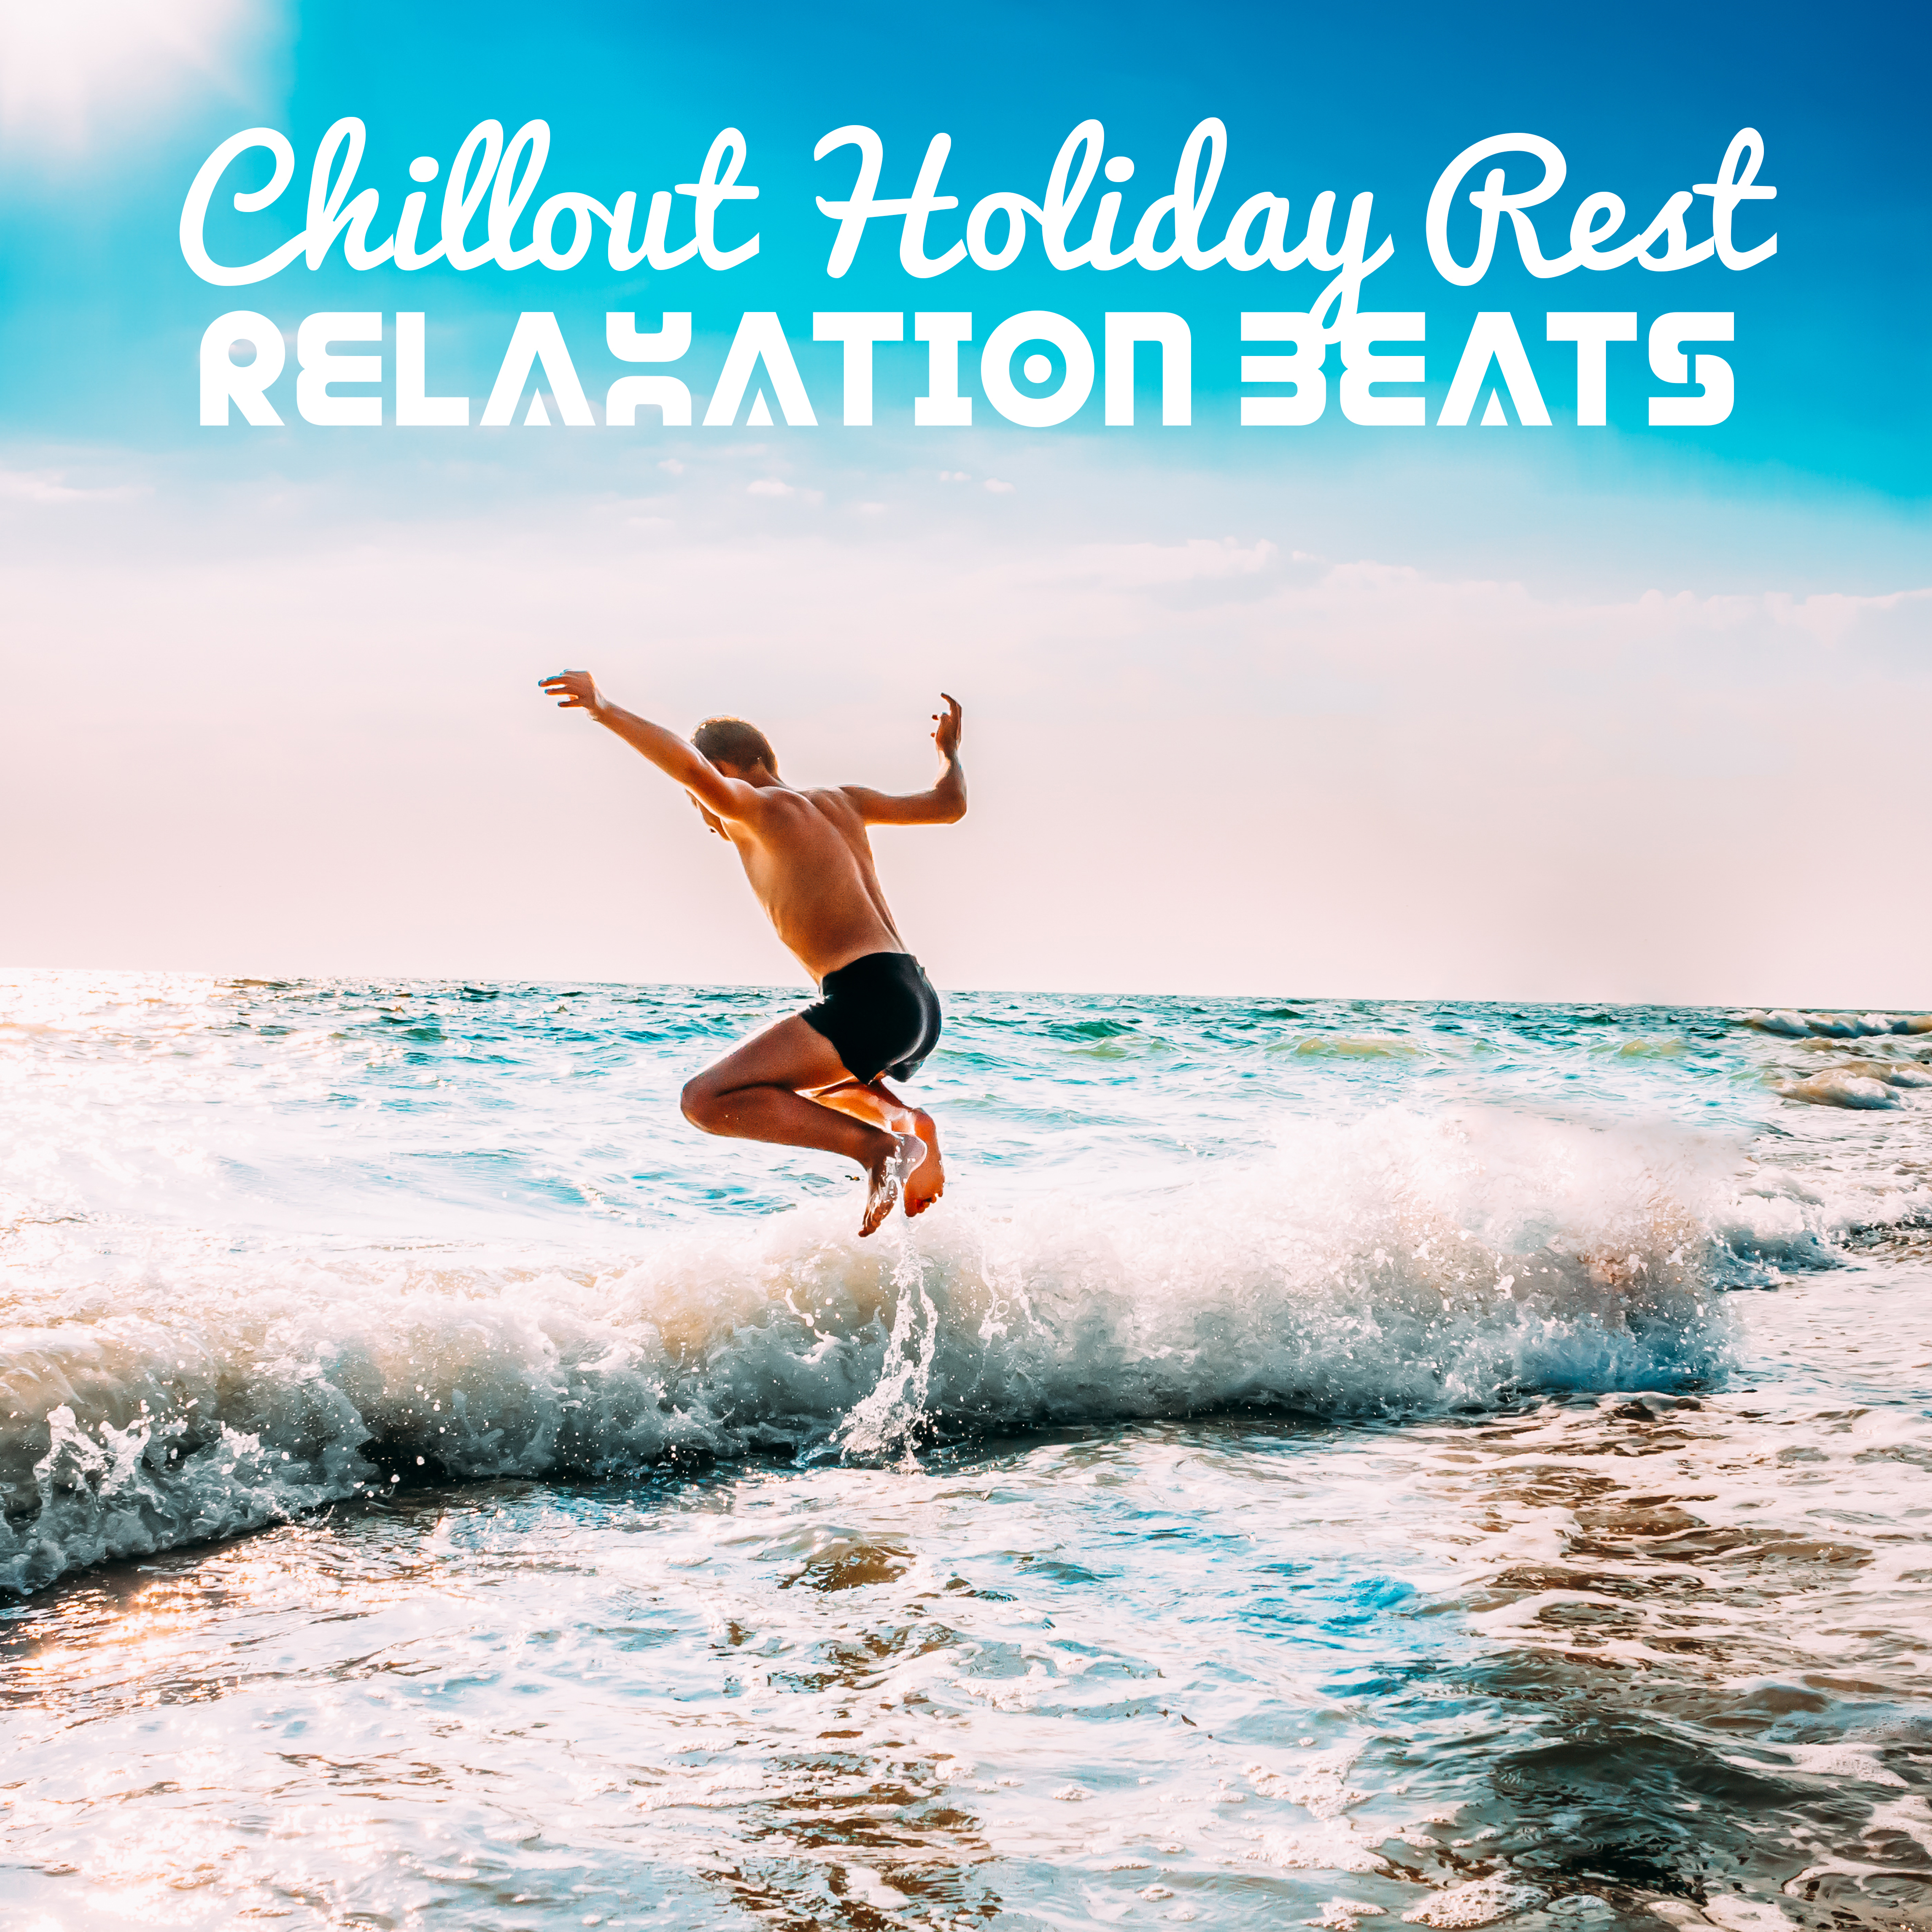 Chillout Holiday Rest Relaxation Beats – Summer Sun & Beach Vibes , Easy Listening Music